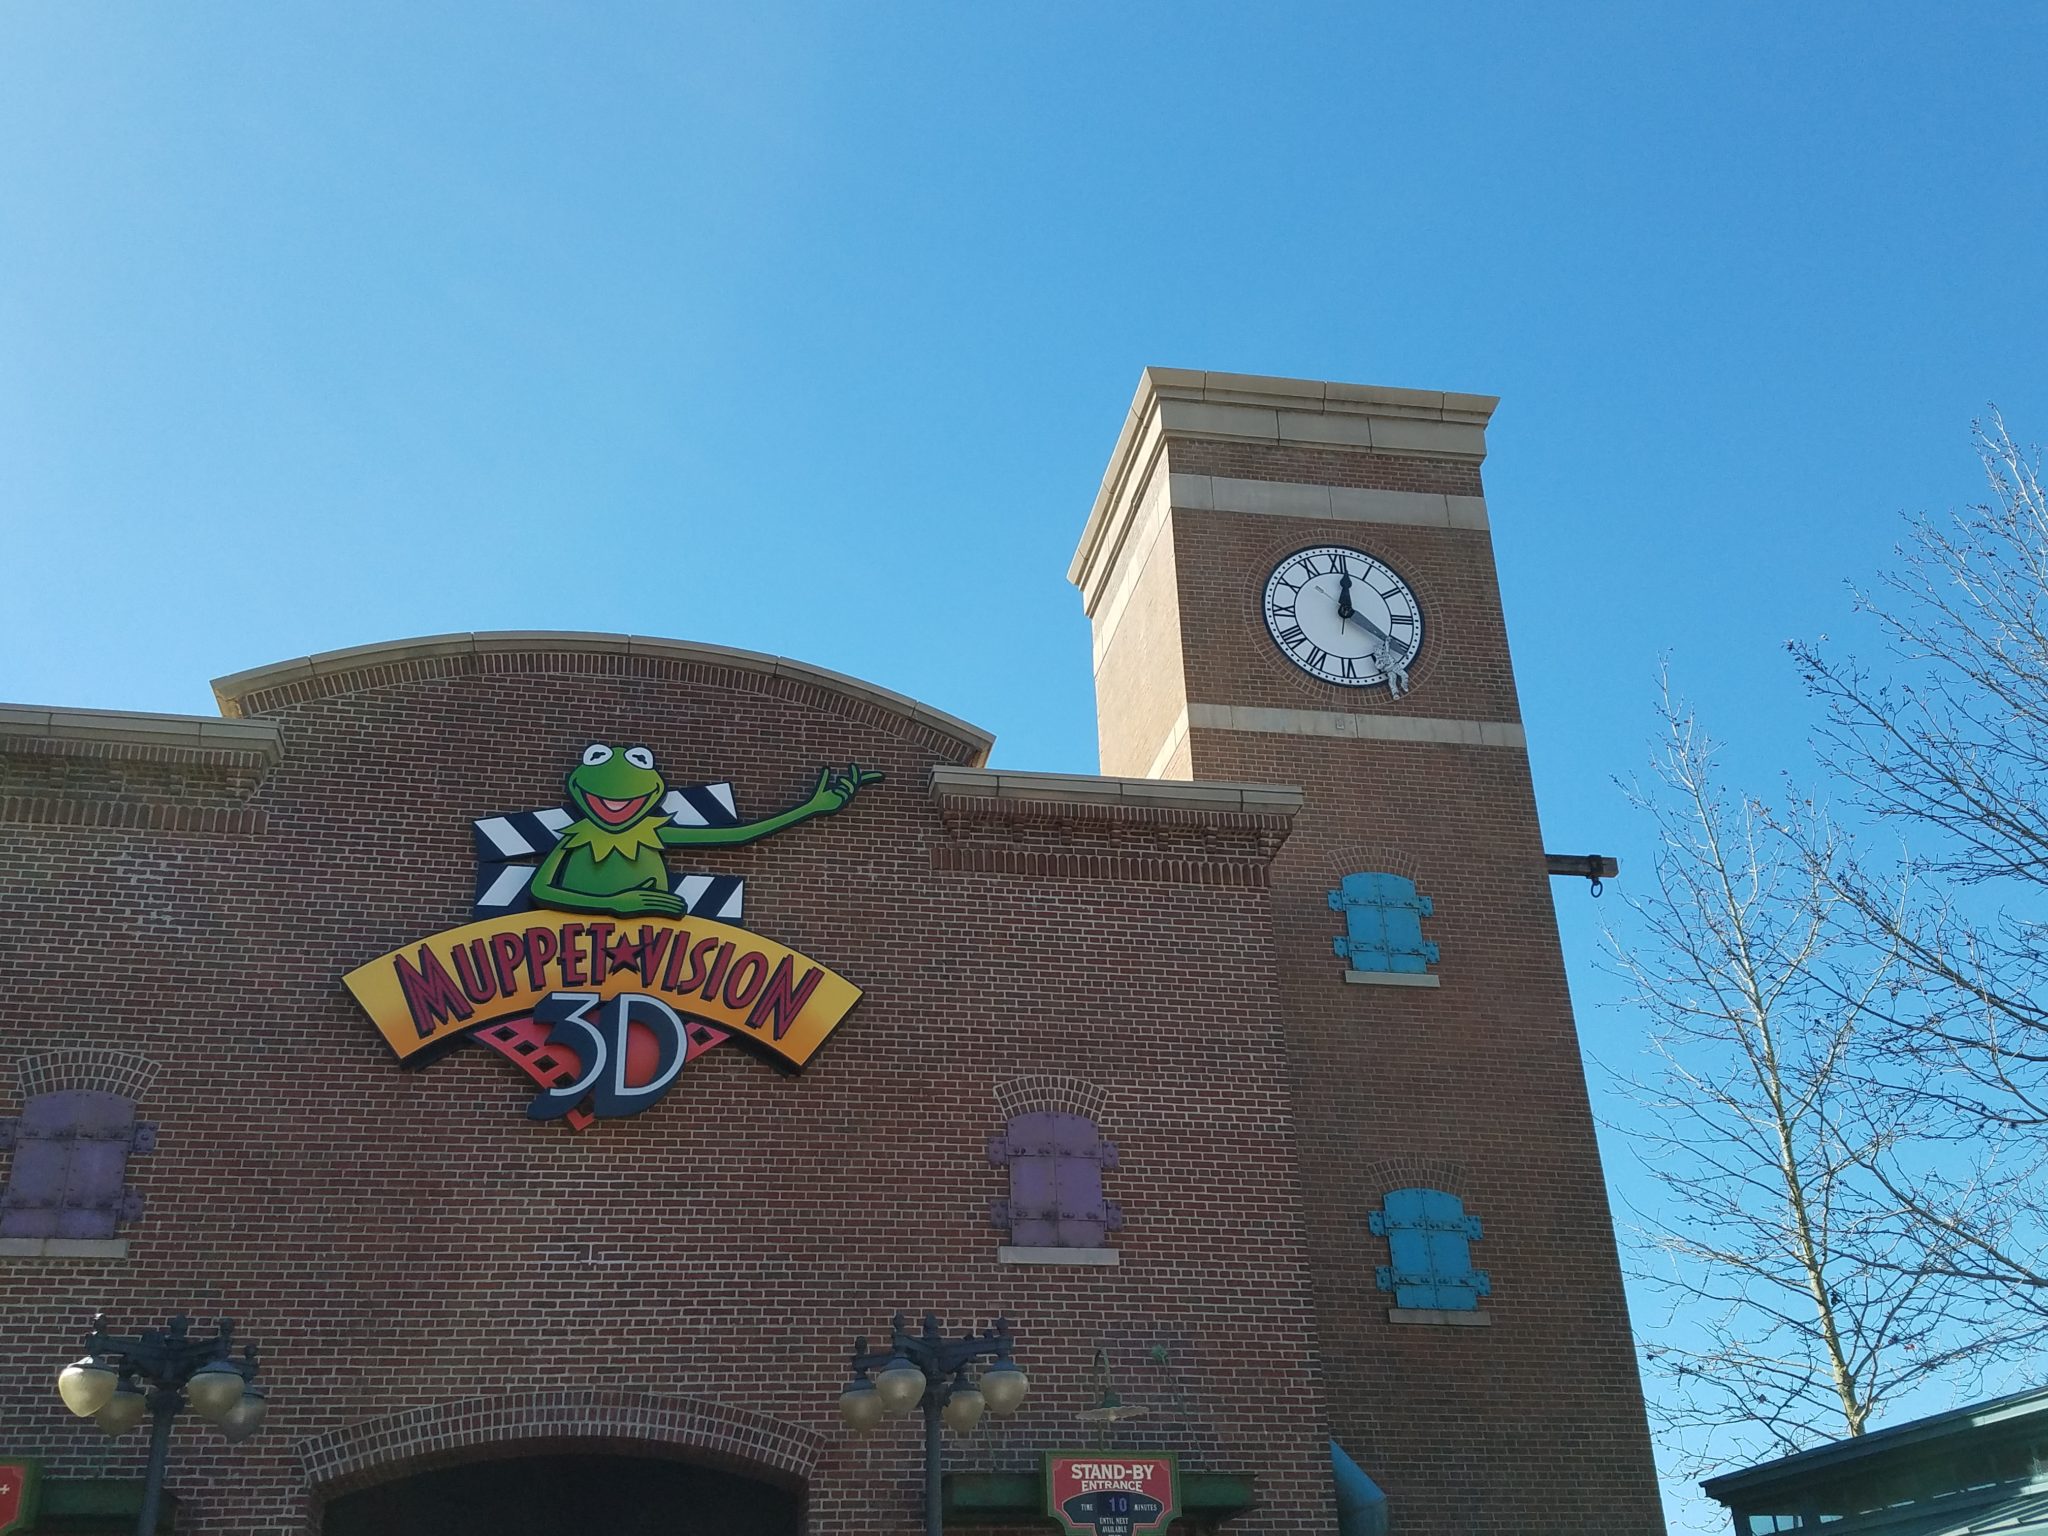 The Muppet Balloon Has Disappeared From Disney’s Hollywood Studios Muppet Courtyard